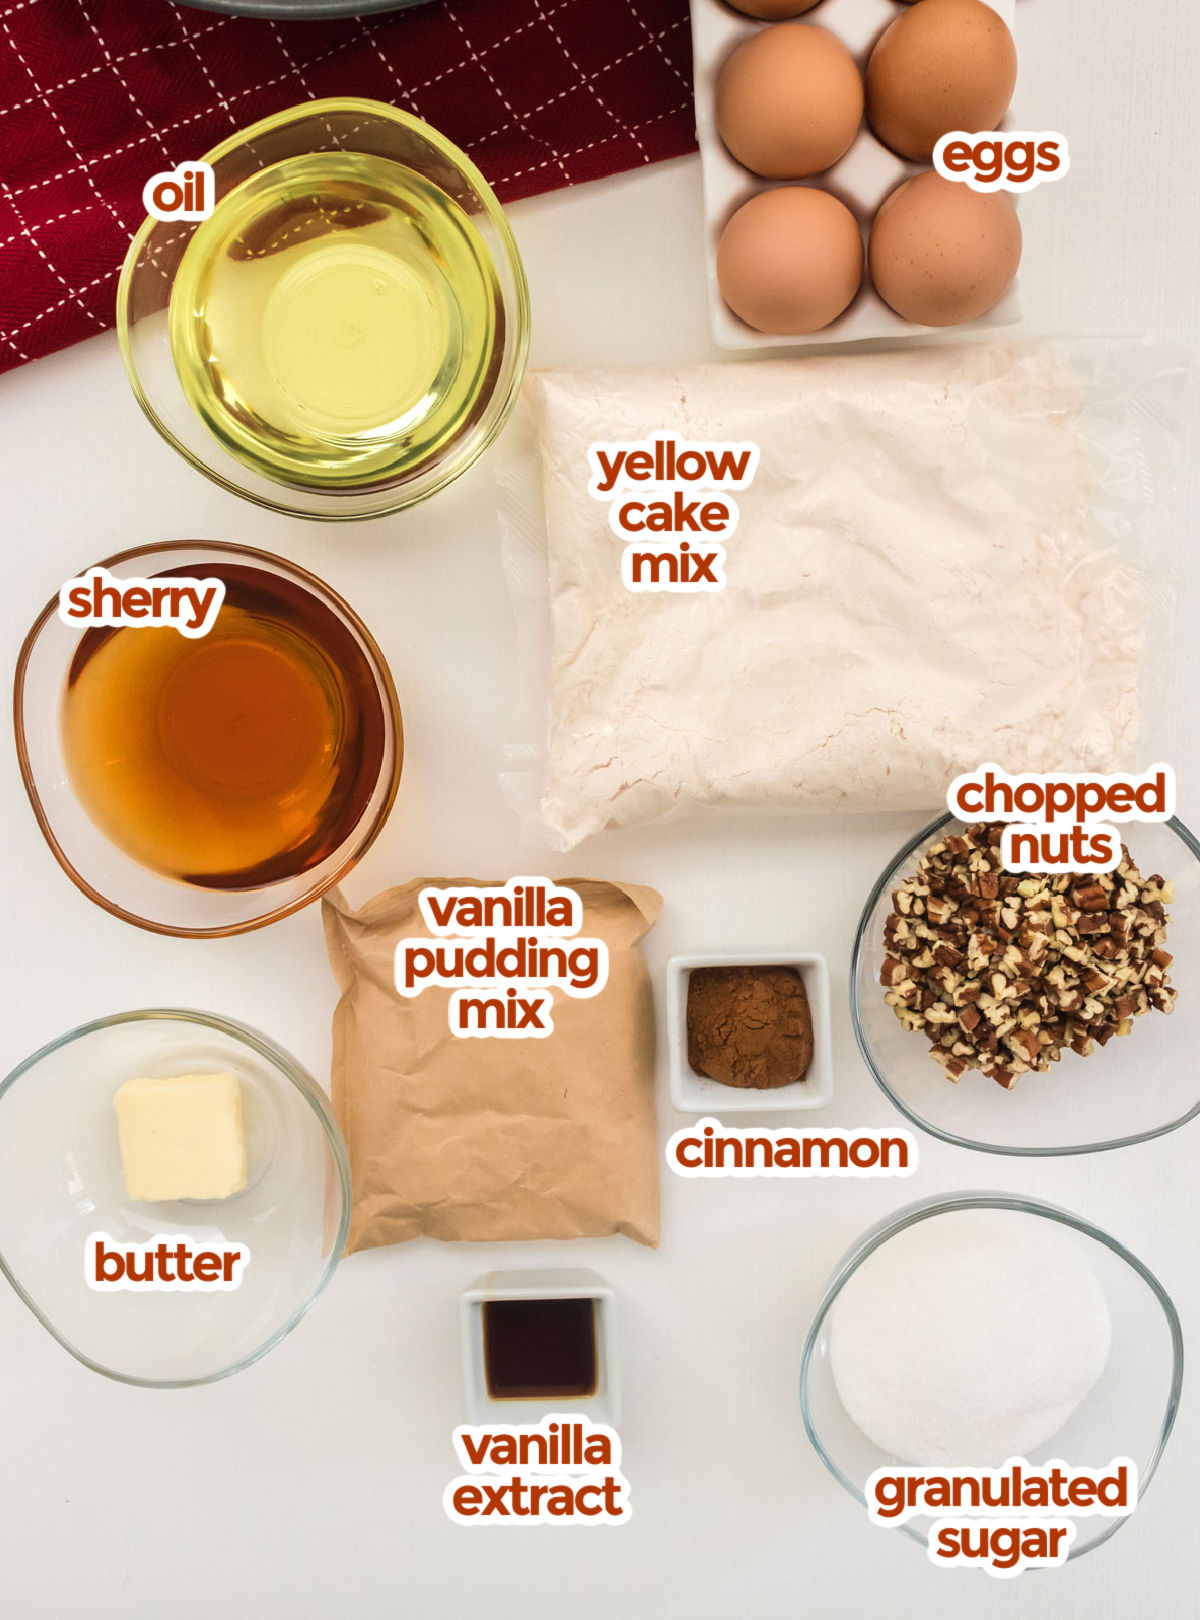 All the ingredients you will need to make Christmas Morning Coffee Cake including yellow cake mix, eggs, oil, sherry, chopped nuts, vanilla pudding mix, cinnamon, butter, vanilla and granulated sugar.